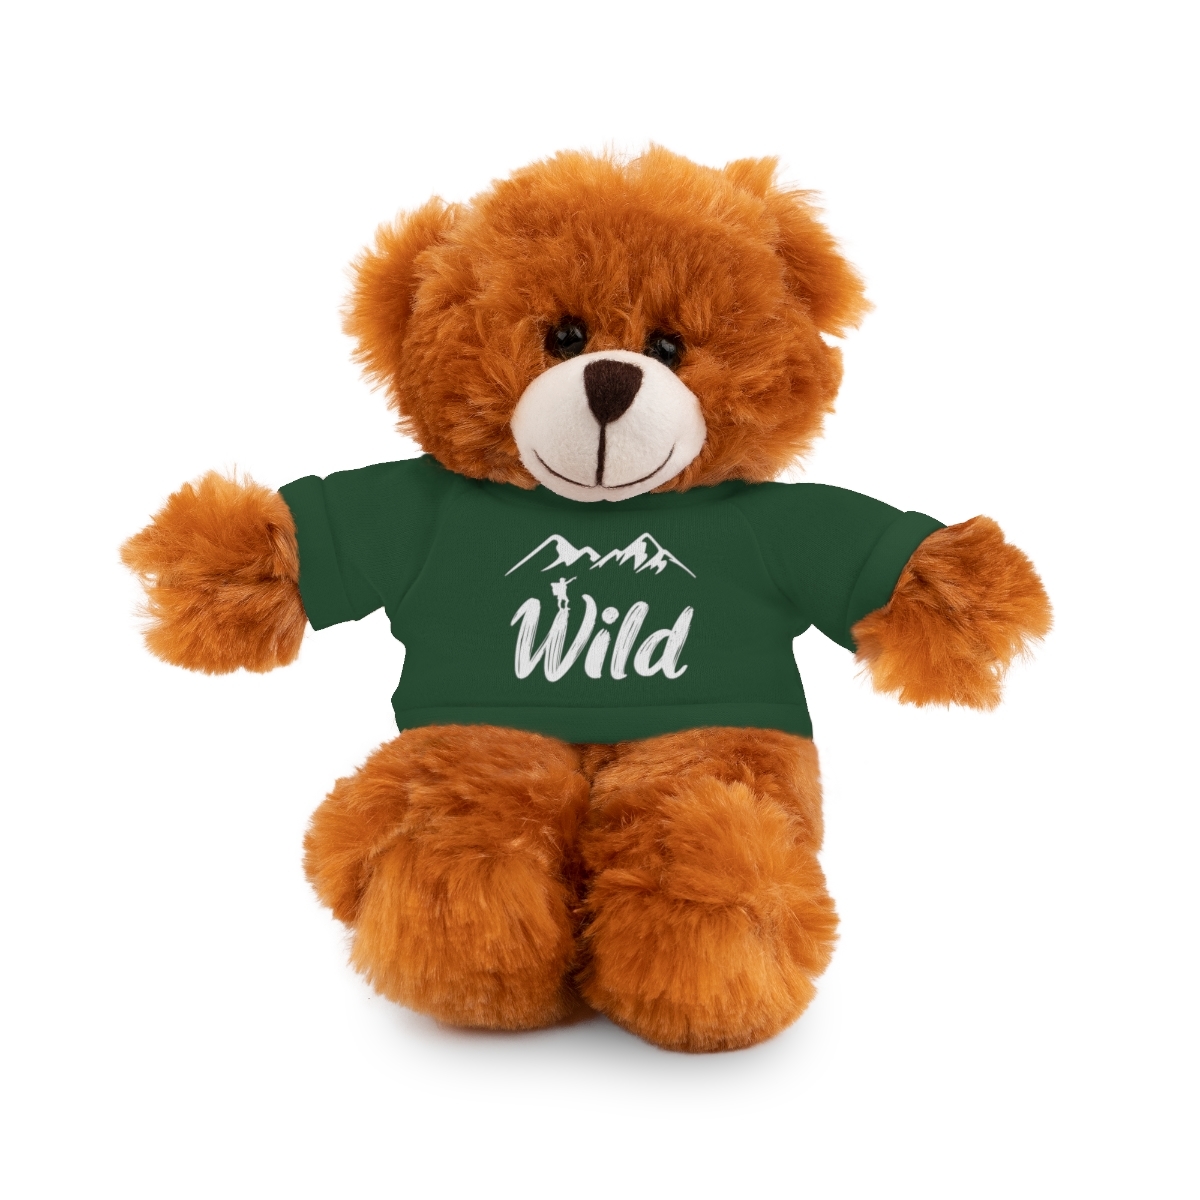 Personalized Stuffed Animals with Custom T-Shirts: Perfect for Kids Ages 3+ - $28.84